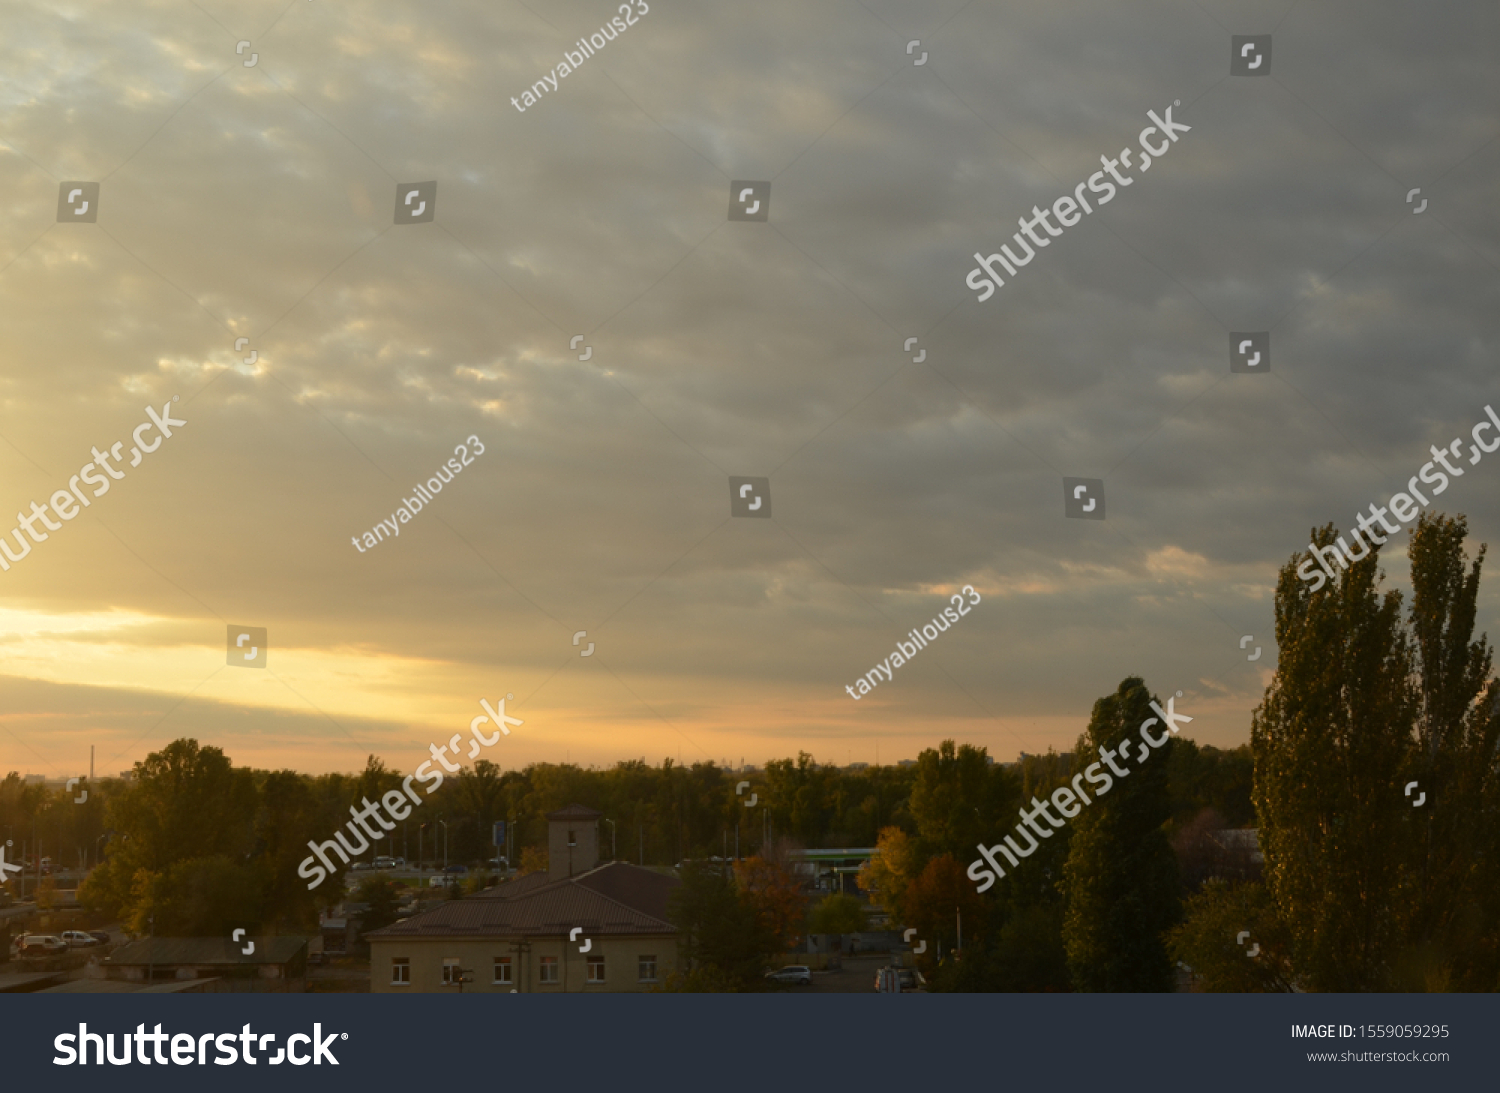 View of the dramatic sky above the sity at sunset with dark blue clouds and pink, purple and yellow flashes from the sun's rays #1559059295